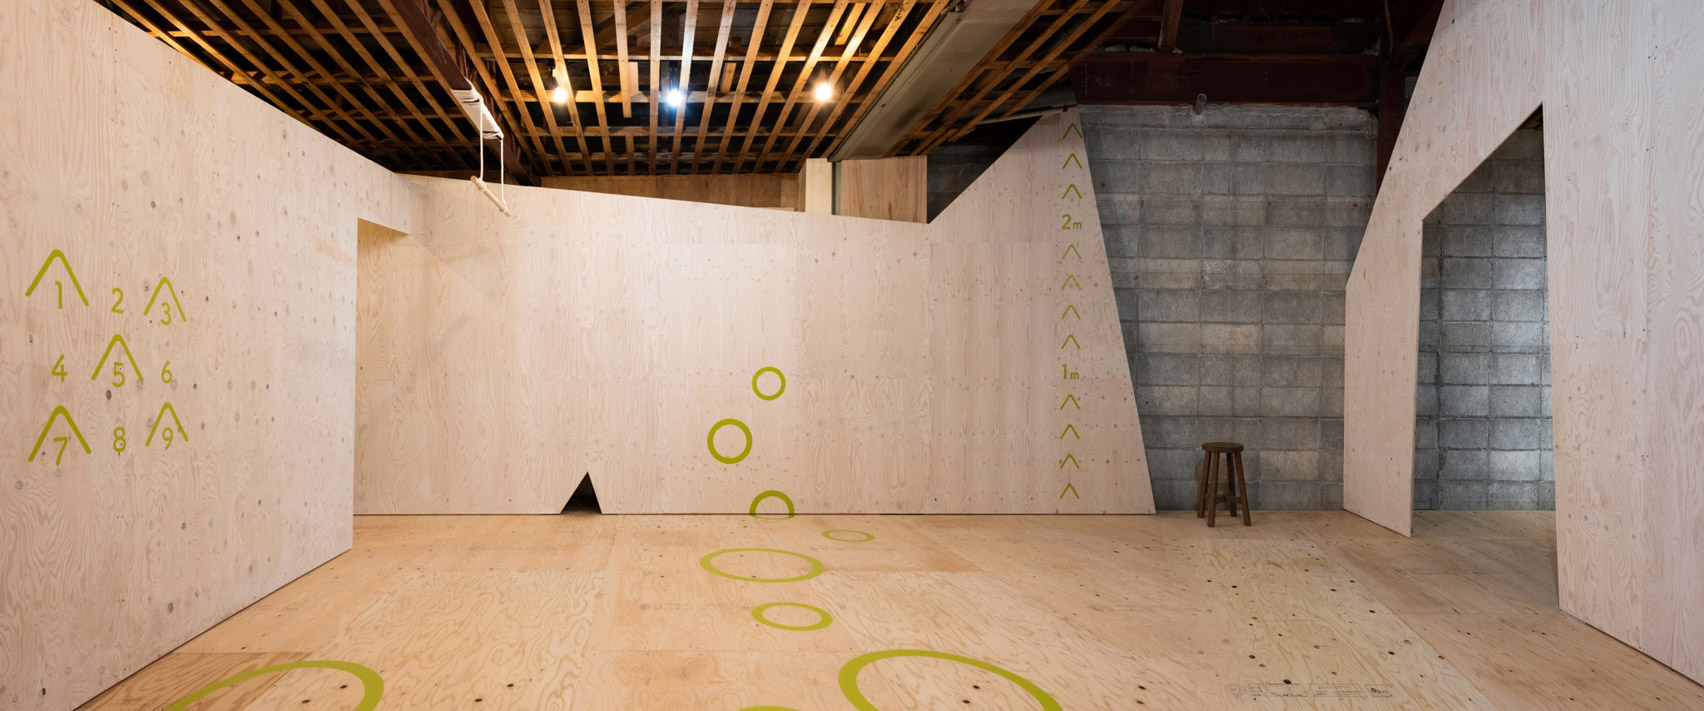 Plywood floor and walls with green markings in Yoridoko employment centre in Japan